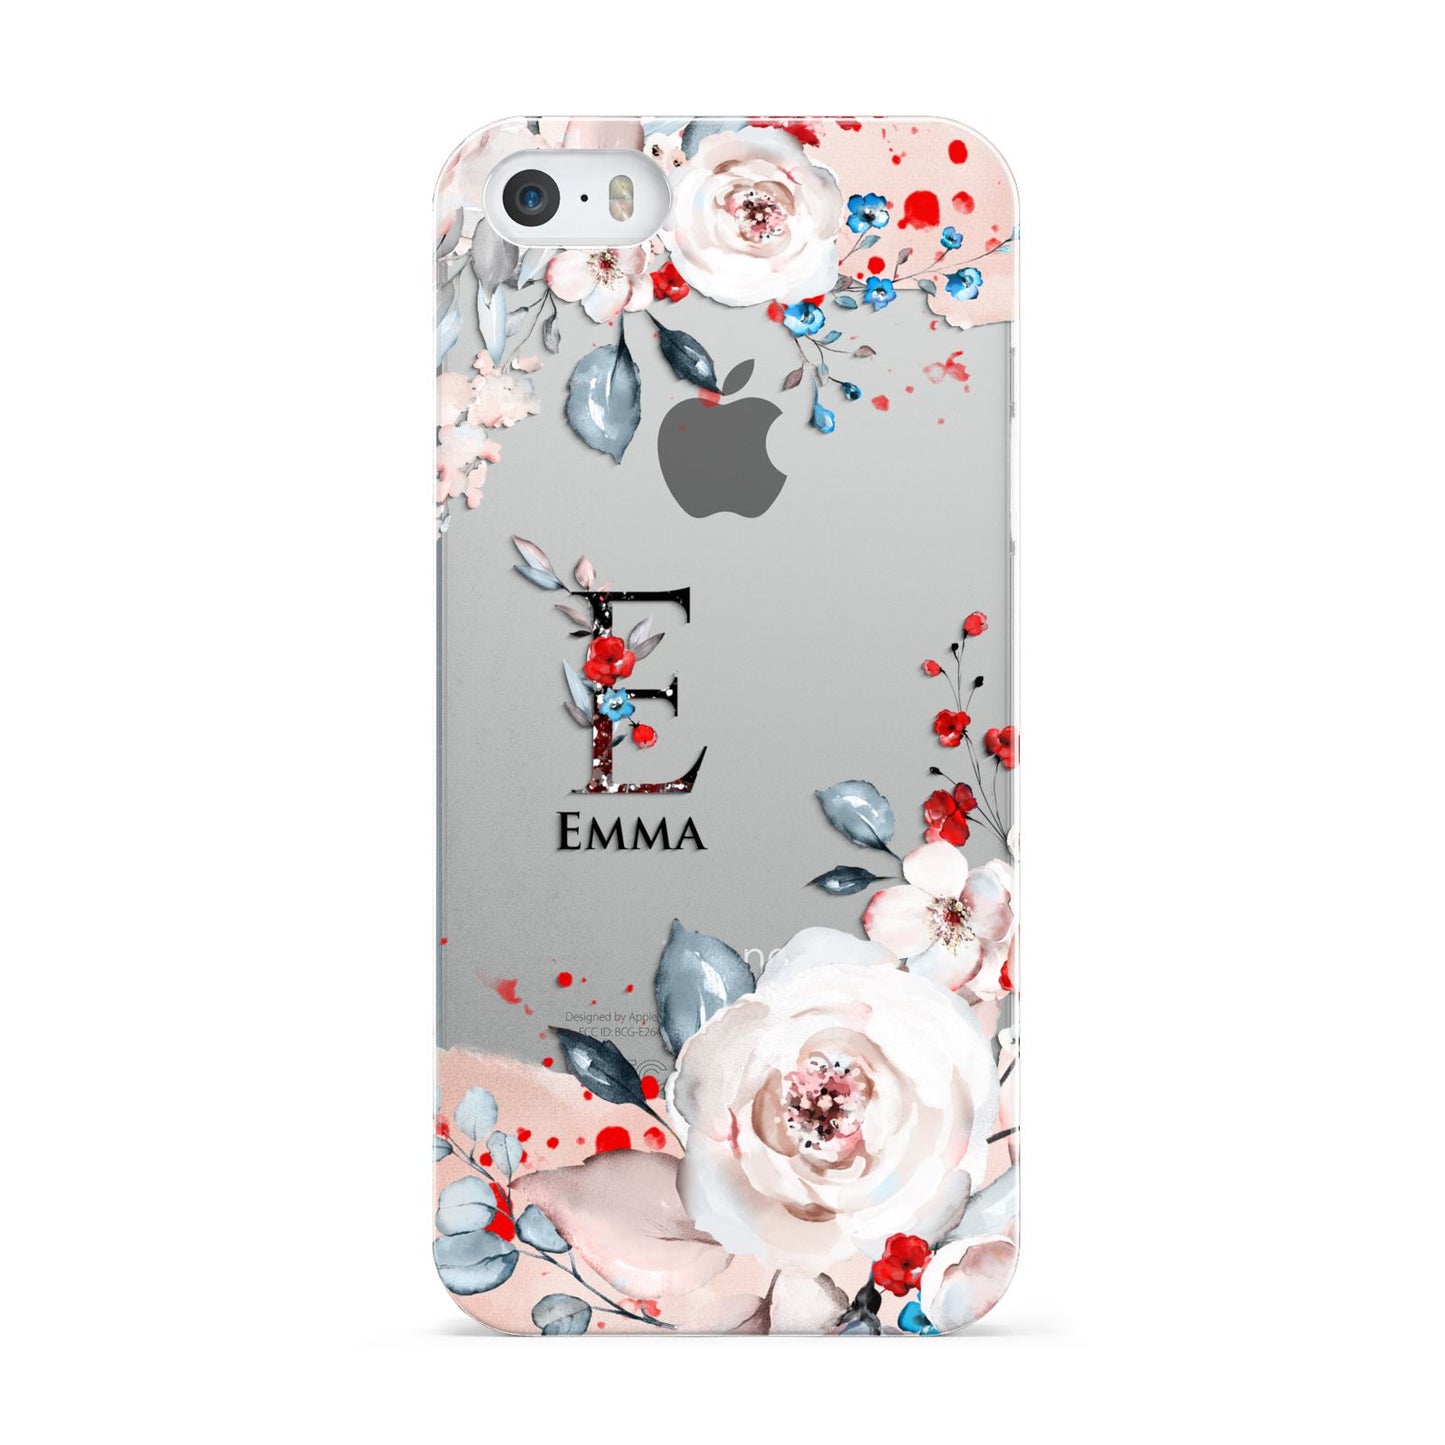 Monogrammed Roses Floral Wreath Apple iPhone 5 Case